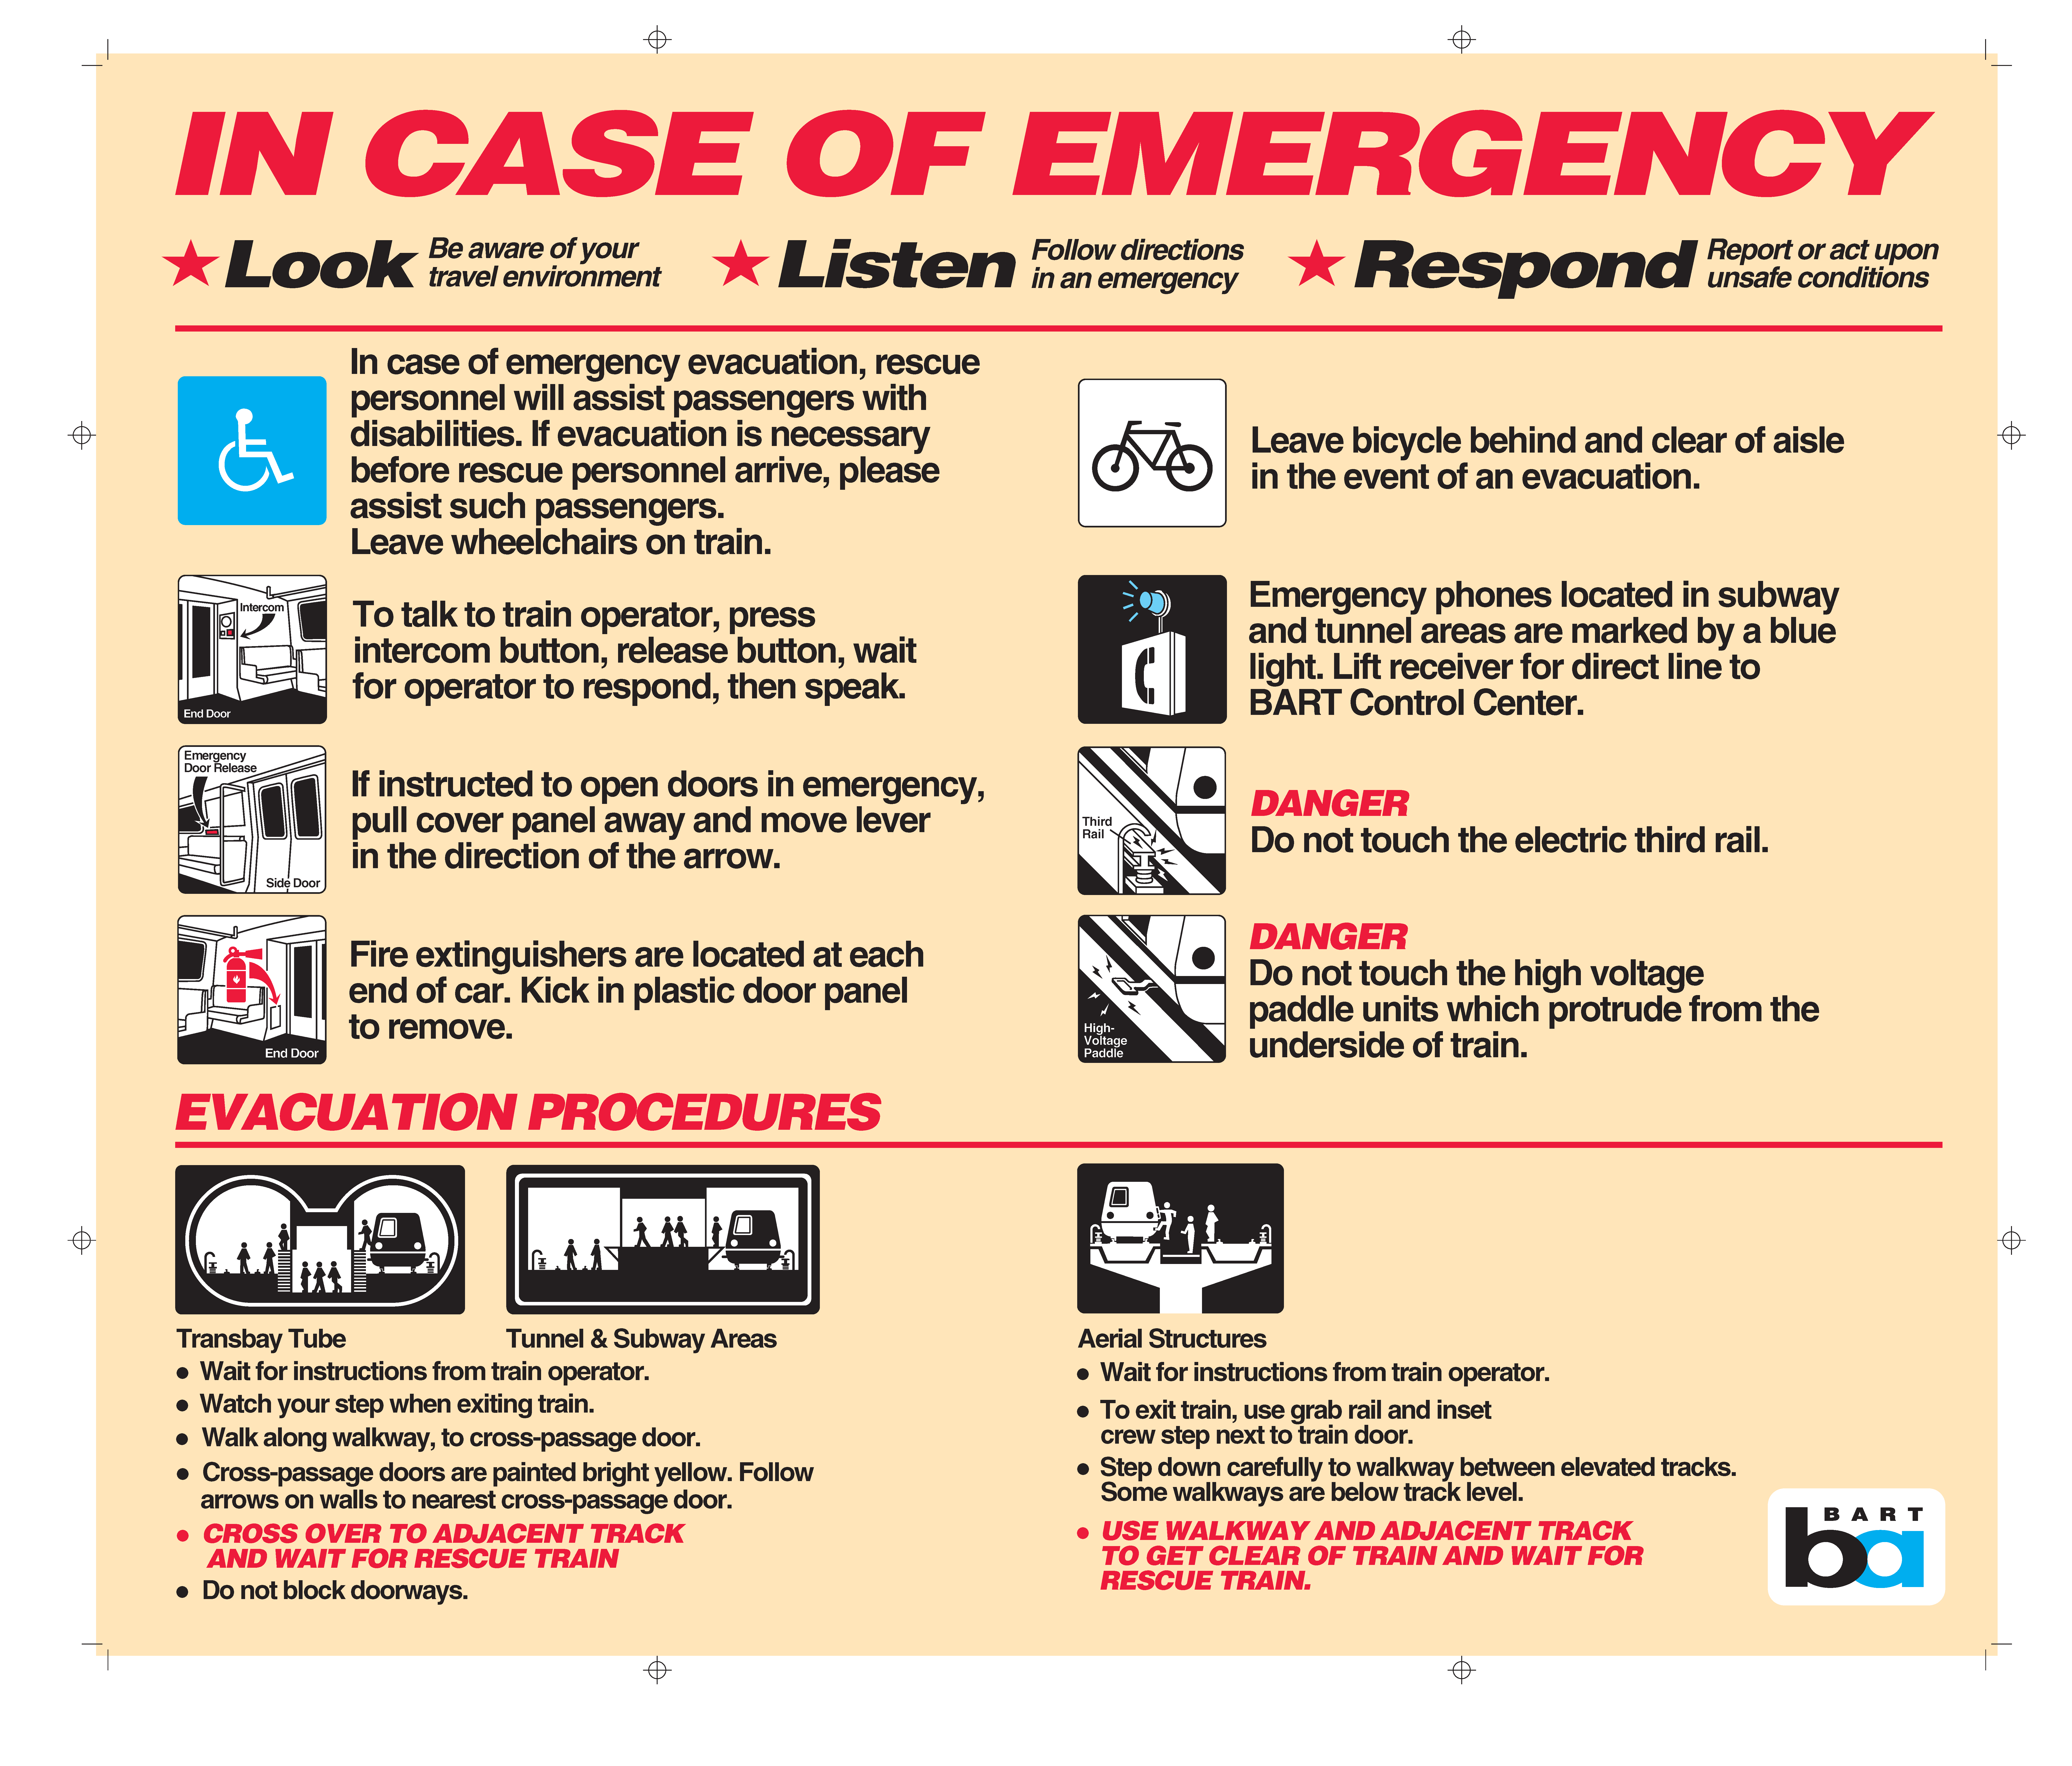 Old Version of Safety Card